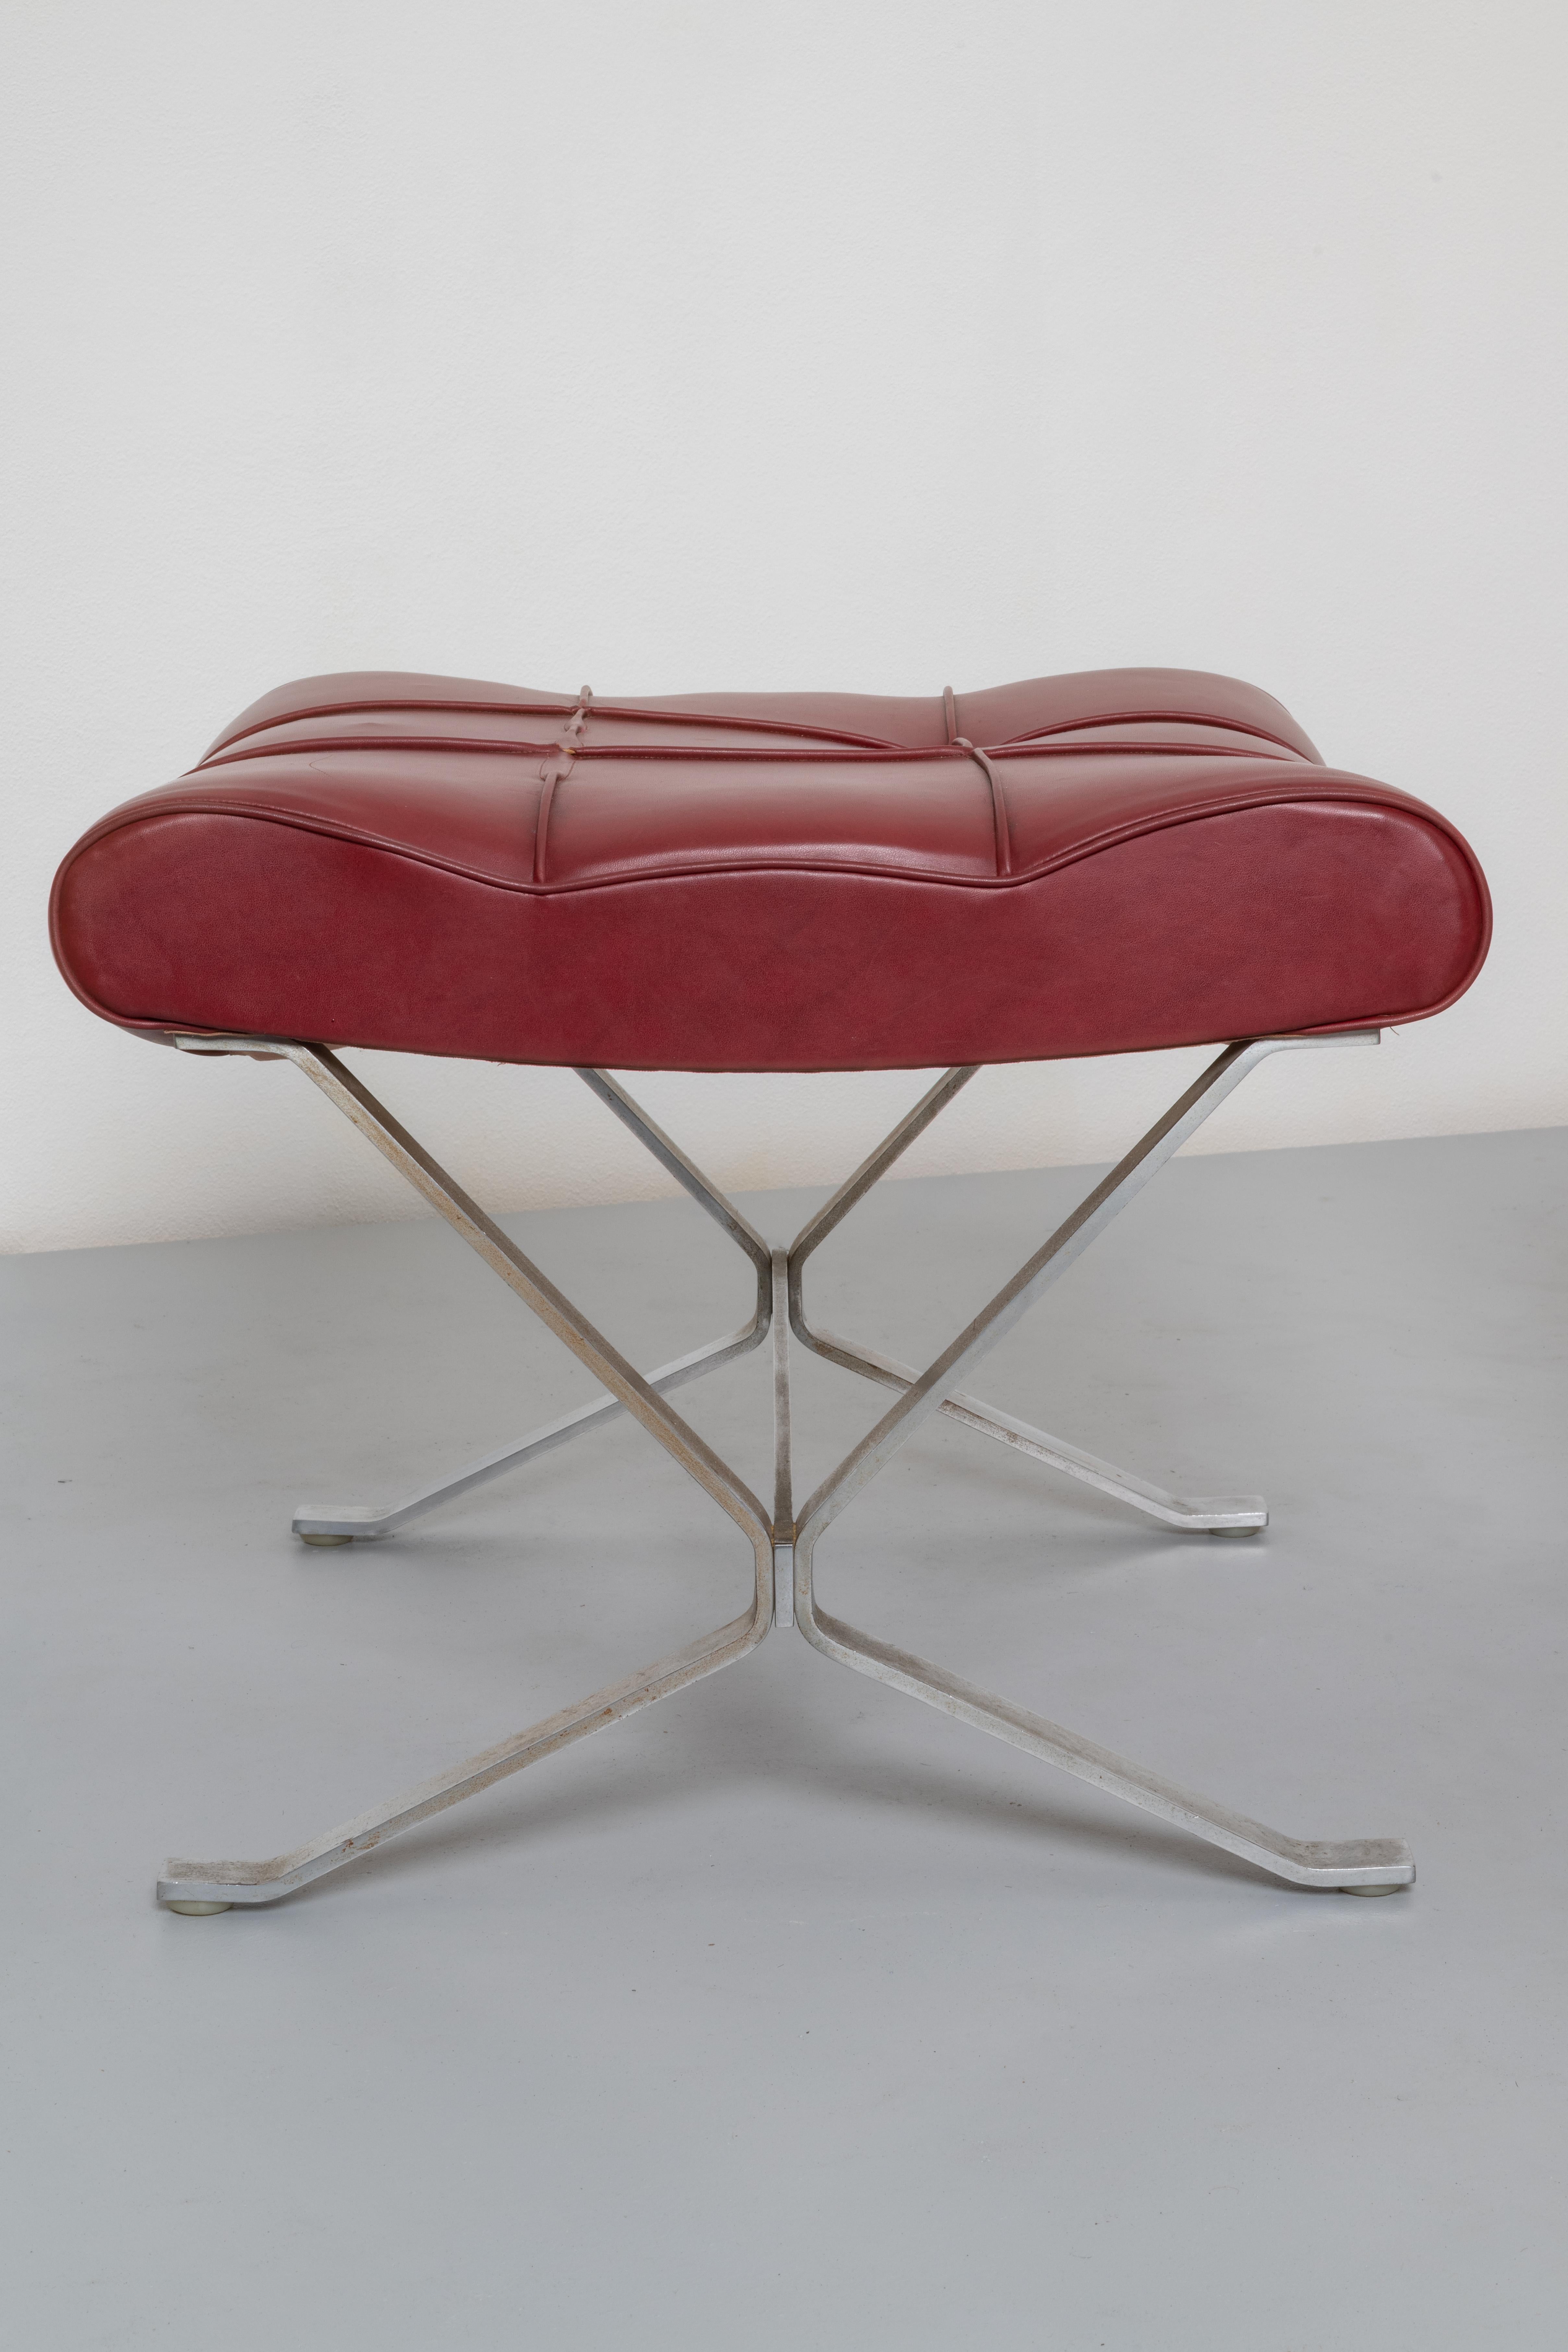 Giulio Moscatelli Prod, Formanova, 1970 Ca. Armchair and Pouff Mod, Sayonara In Good Condition For Sale In London, GB